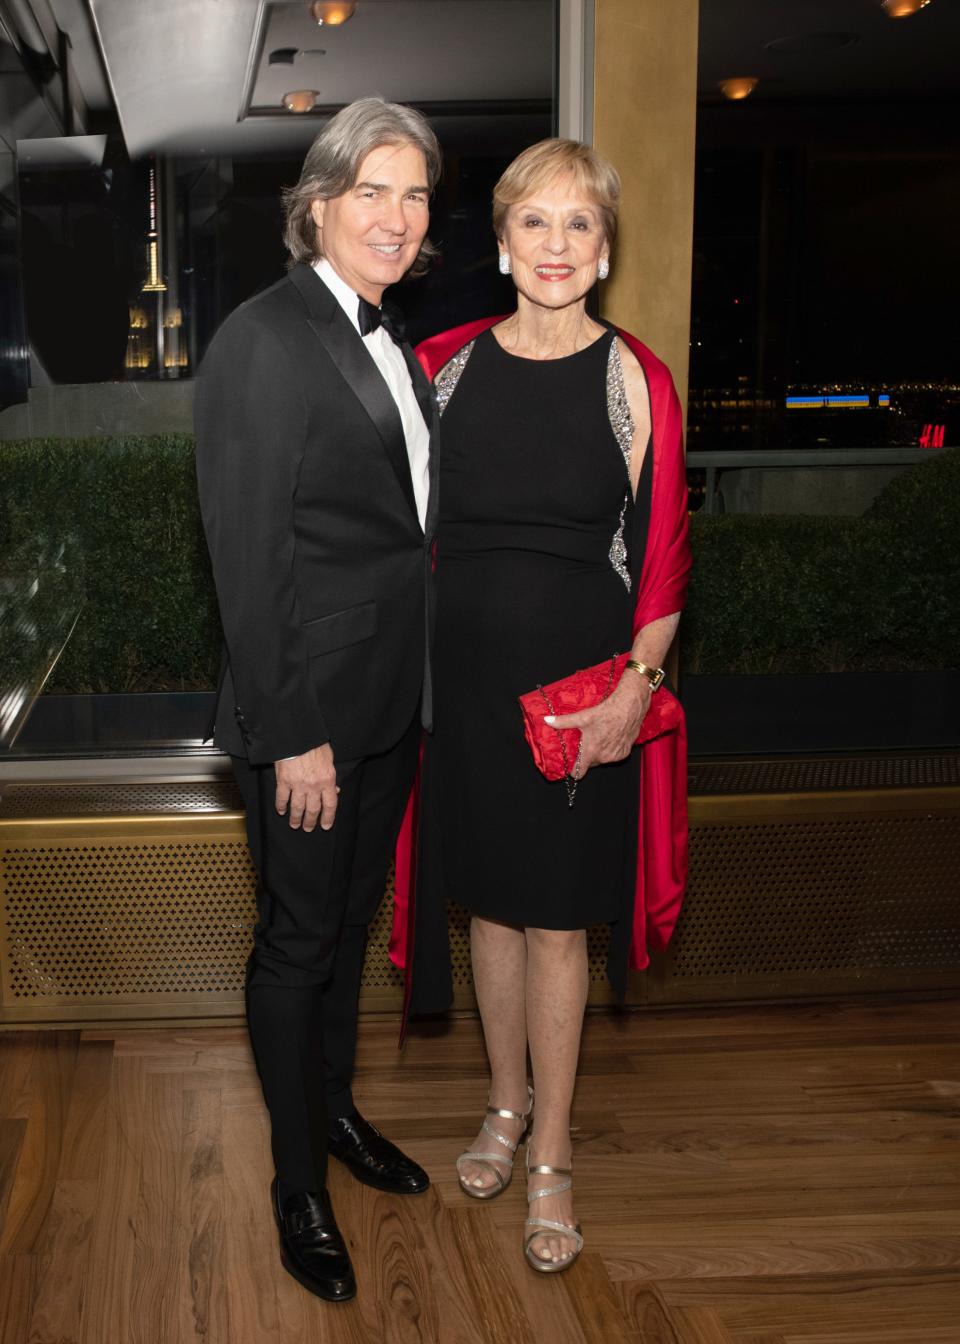 Bill Bone and Cynthia Friedman attended the American Friends of the Louvre gala.